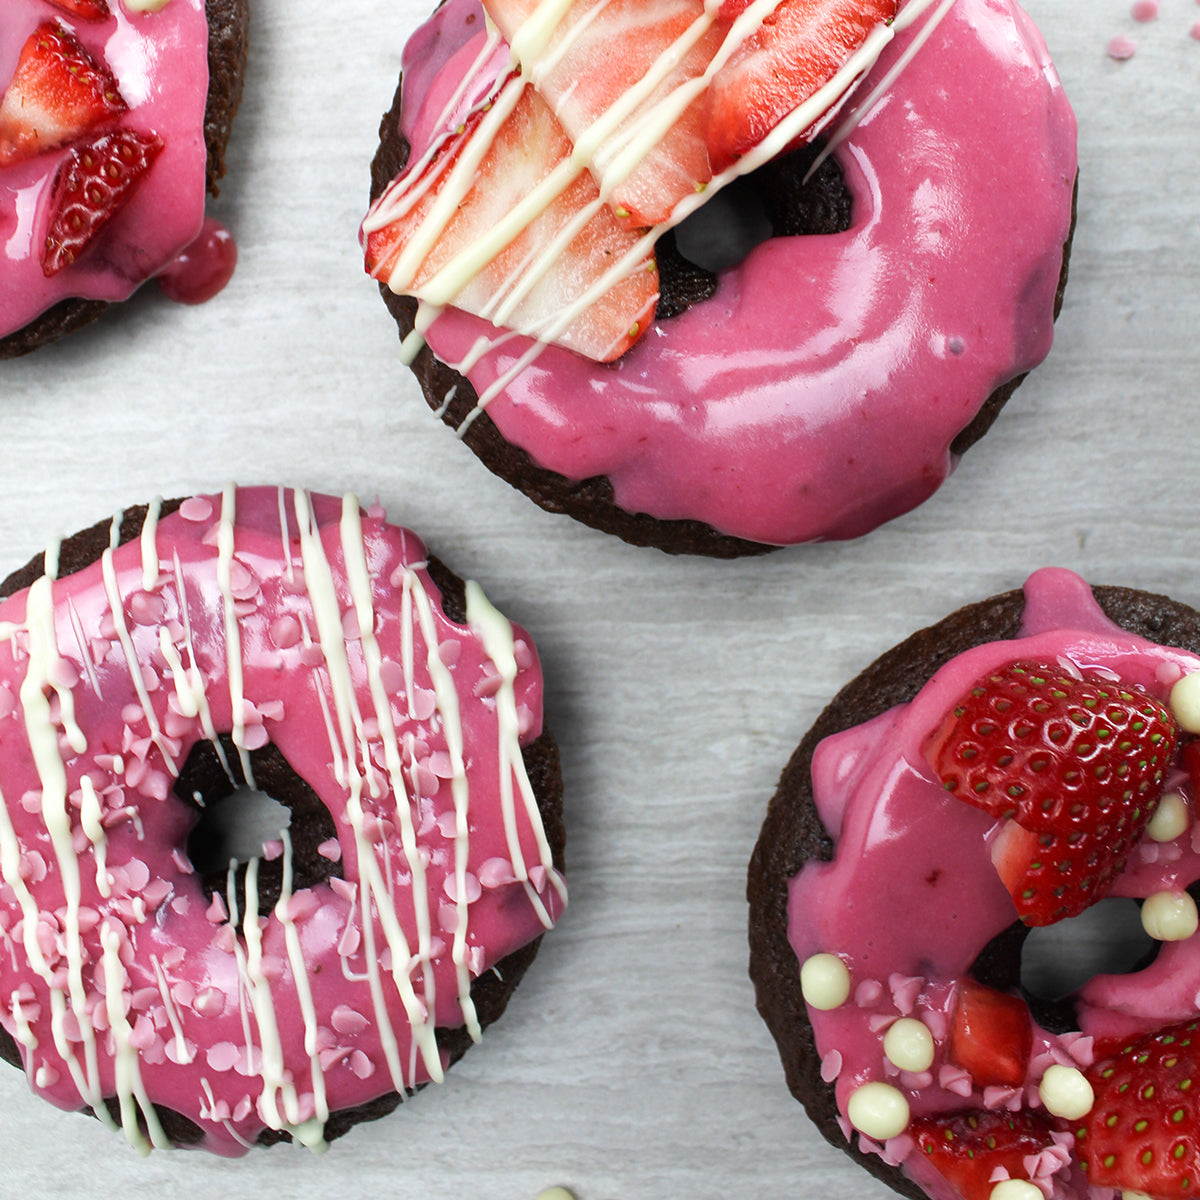 Chocolate cake donut topped with strawberry flavored donut icing, strawberries, pink white chocolate micro drops and white chocolate drizzle